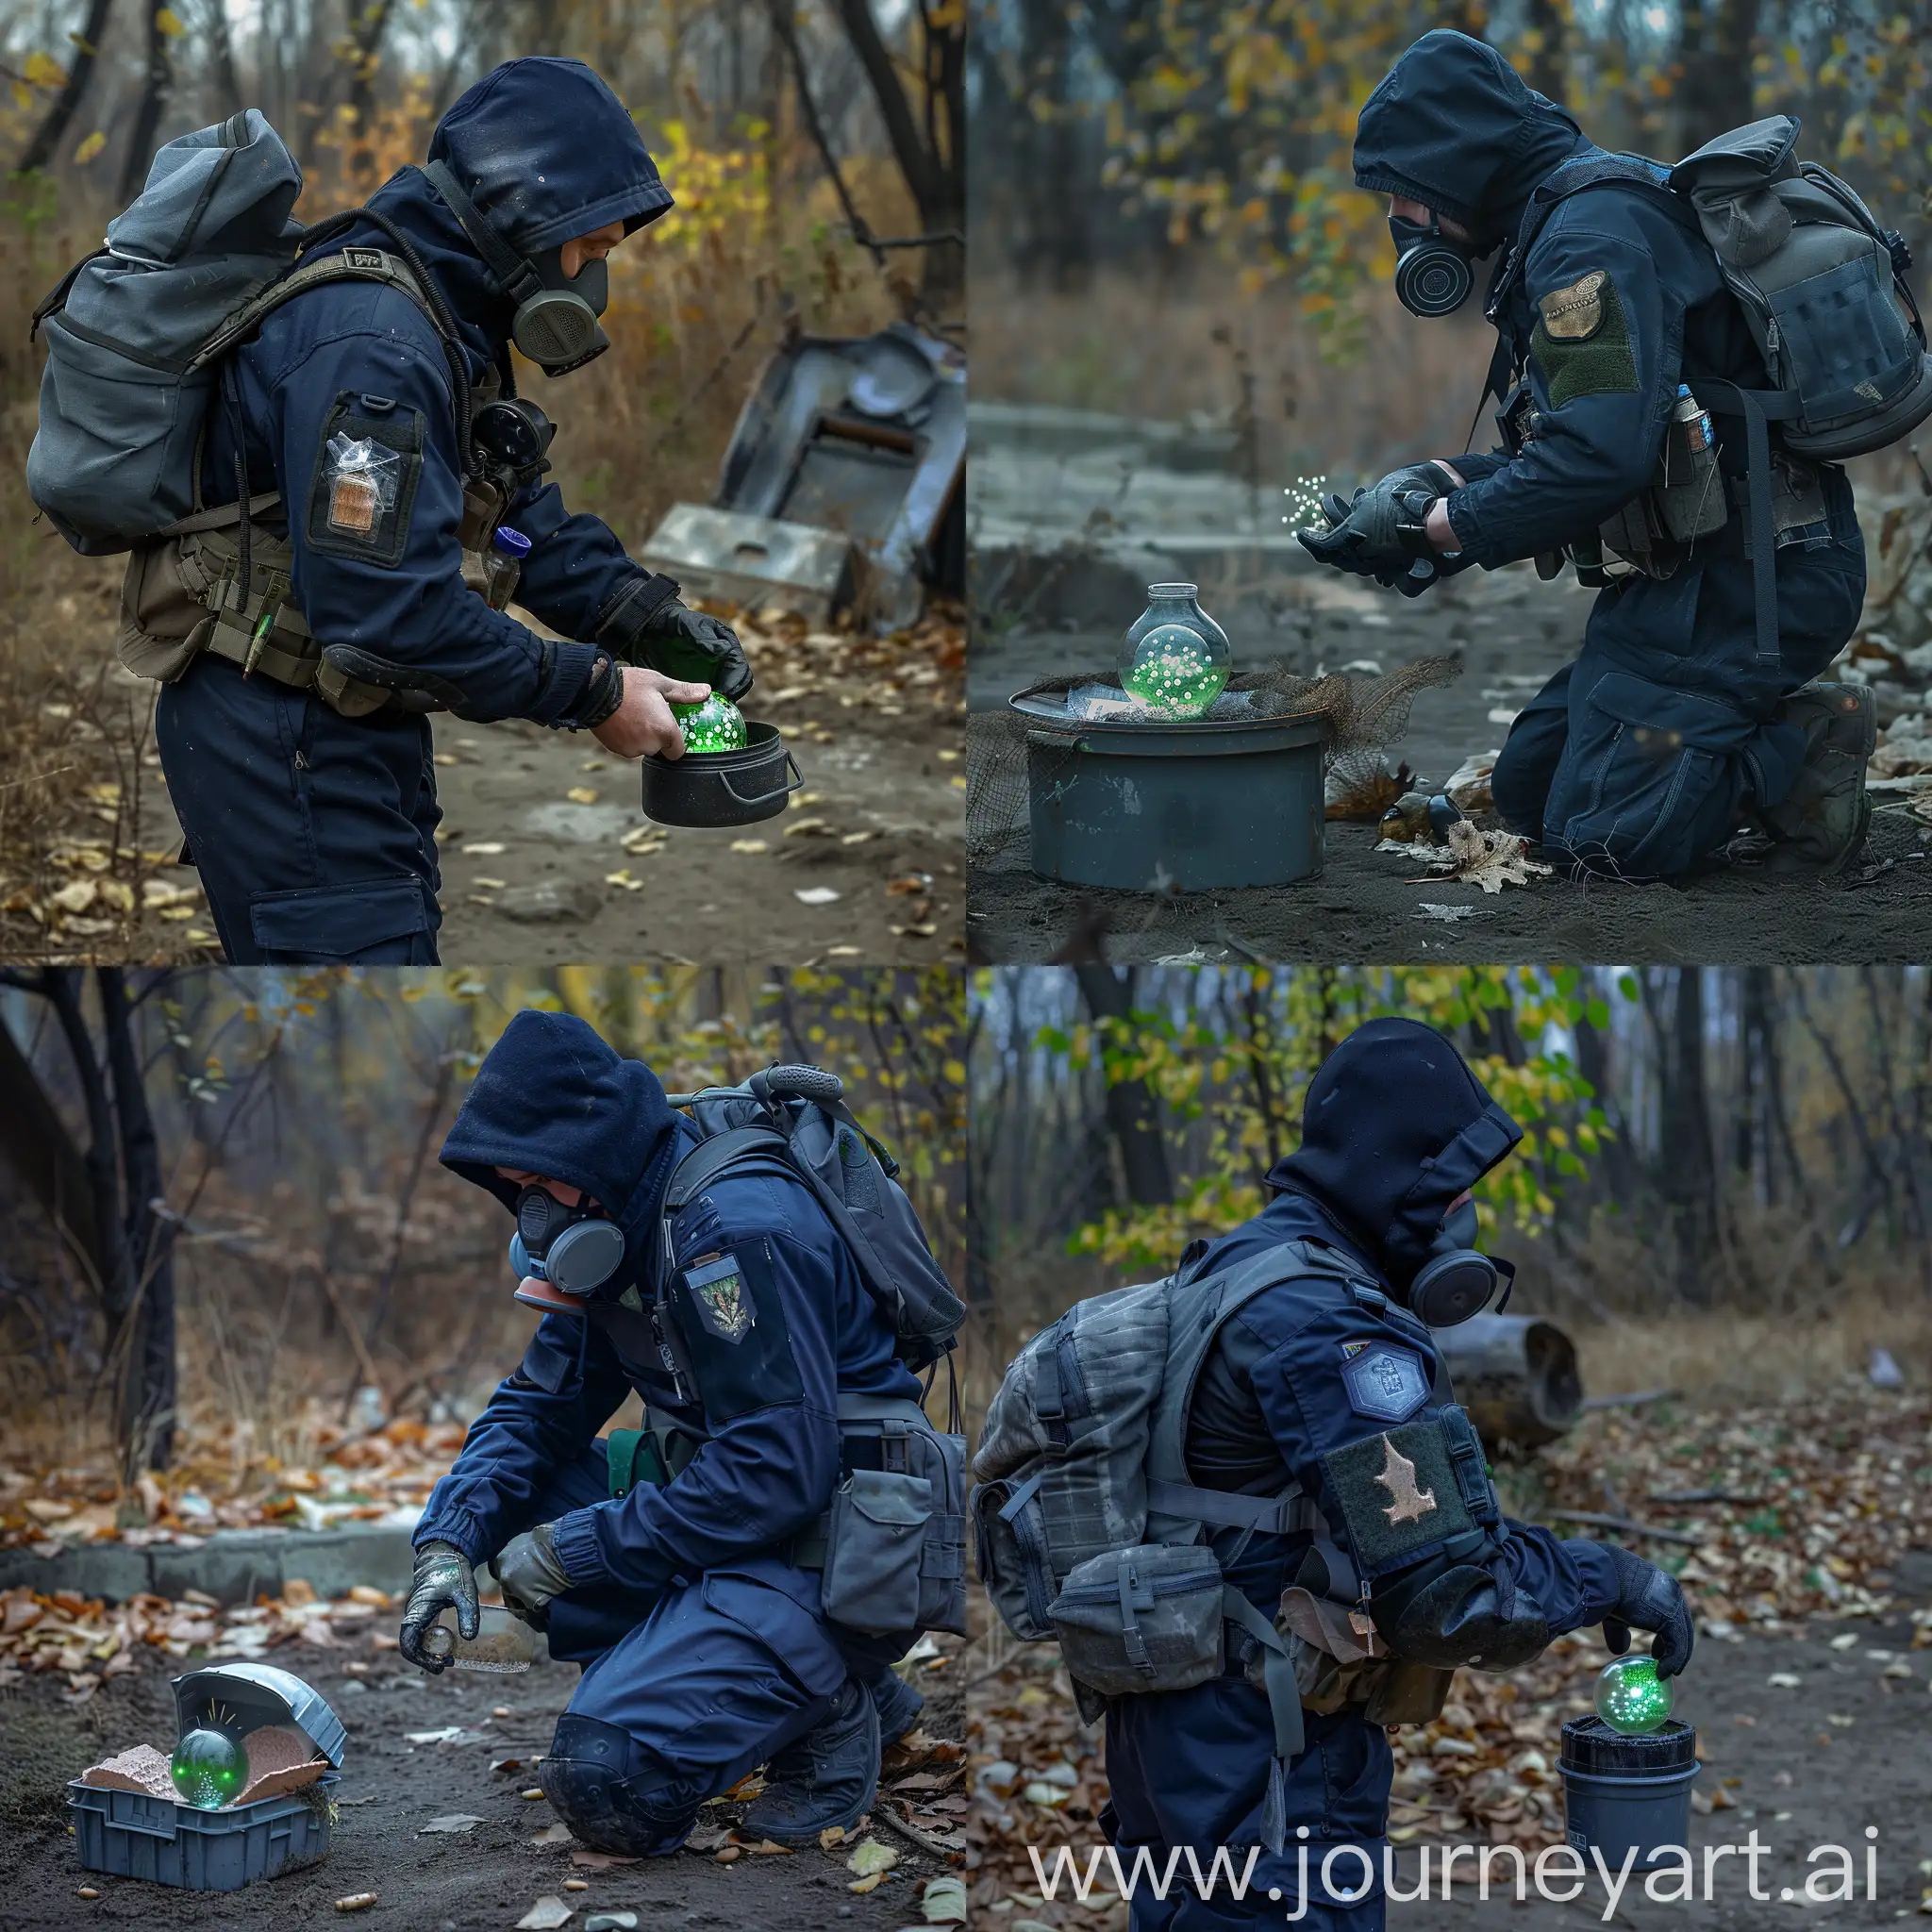 The mercenary from the stalker game, the mercenary is dressed in a dark blue jumpsuit, gray military unloading, a small military backpack, a respirator mask, a hood, the mercenary collects the small artifact in the small container, the artifact looks like a green ball with bubbles inside, the ball glows, the weather is Gloomy autumn, Chernobyl.